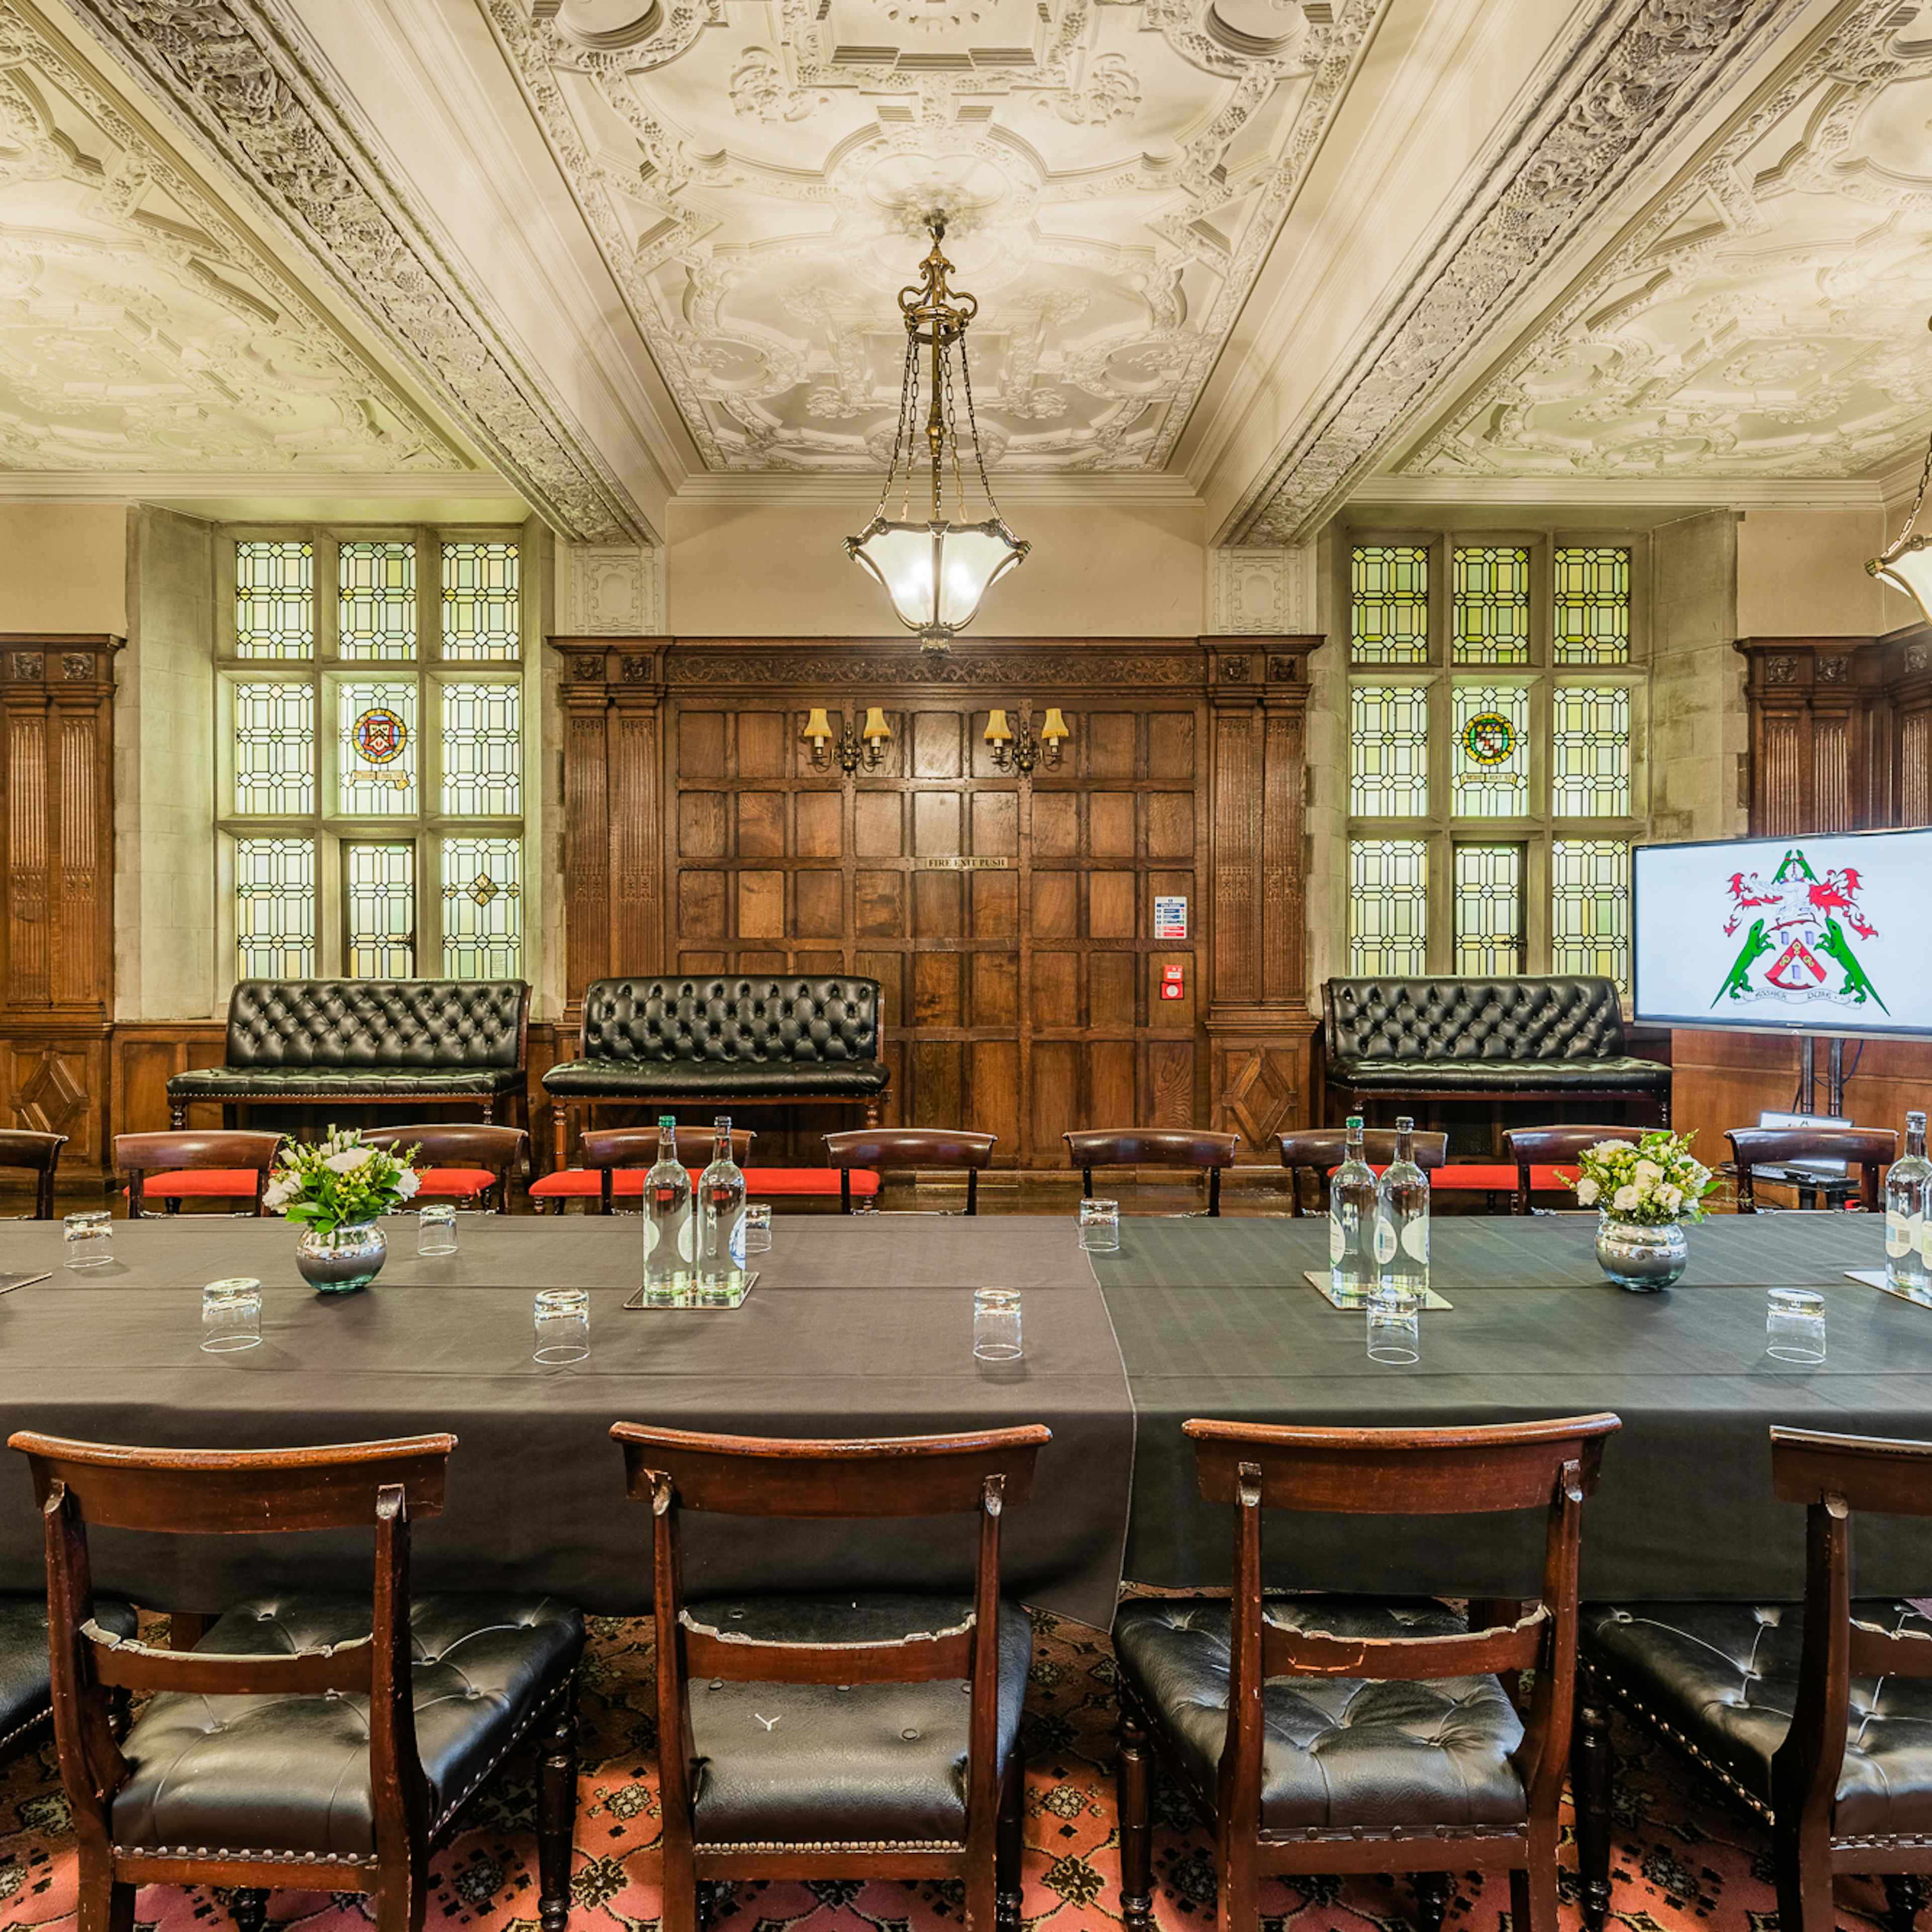 Ironmongers' Hall - The Court Room and The Luncheon Room image 3